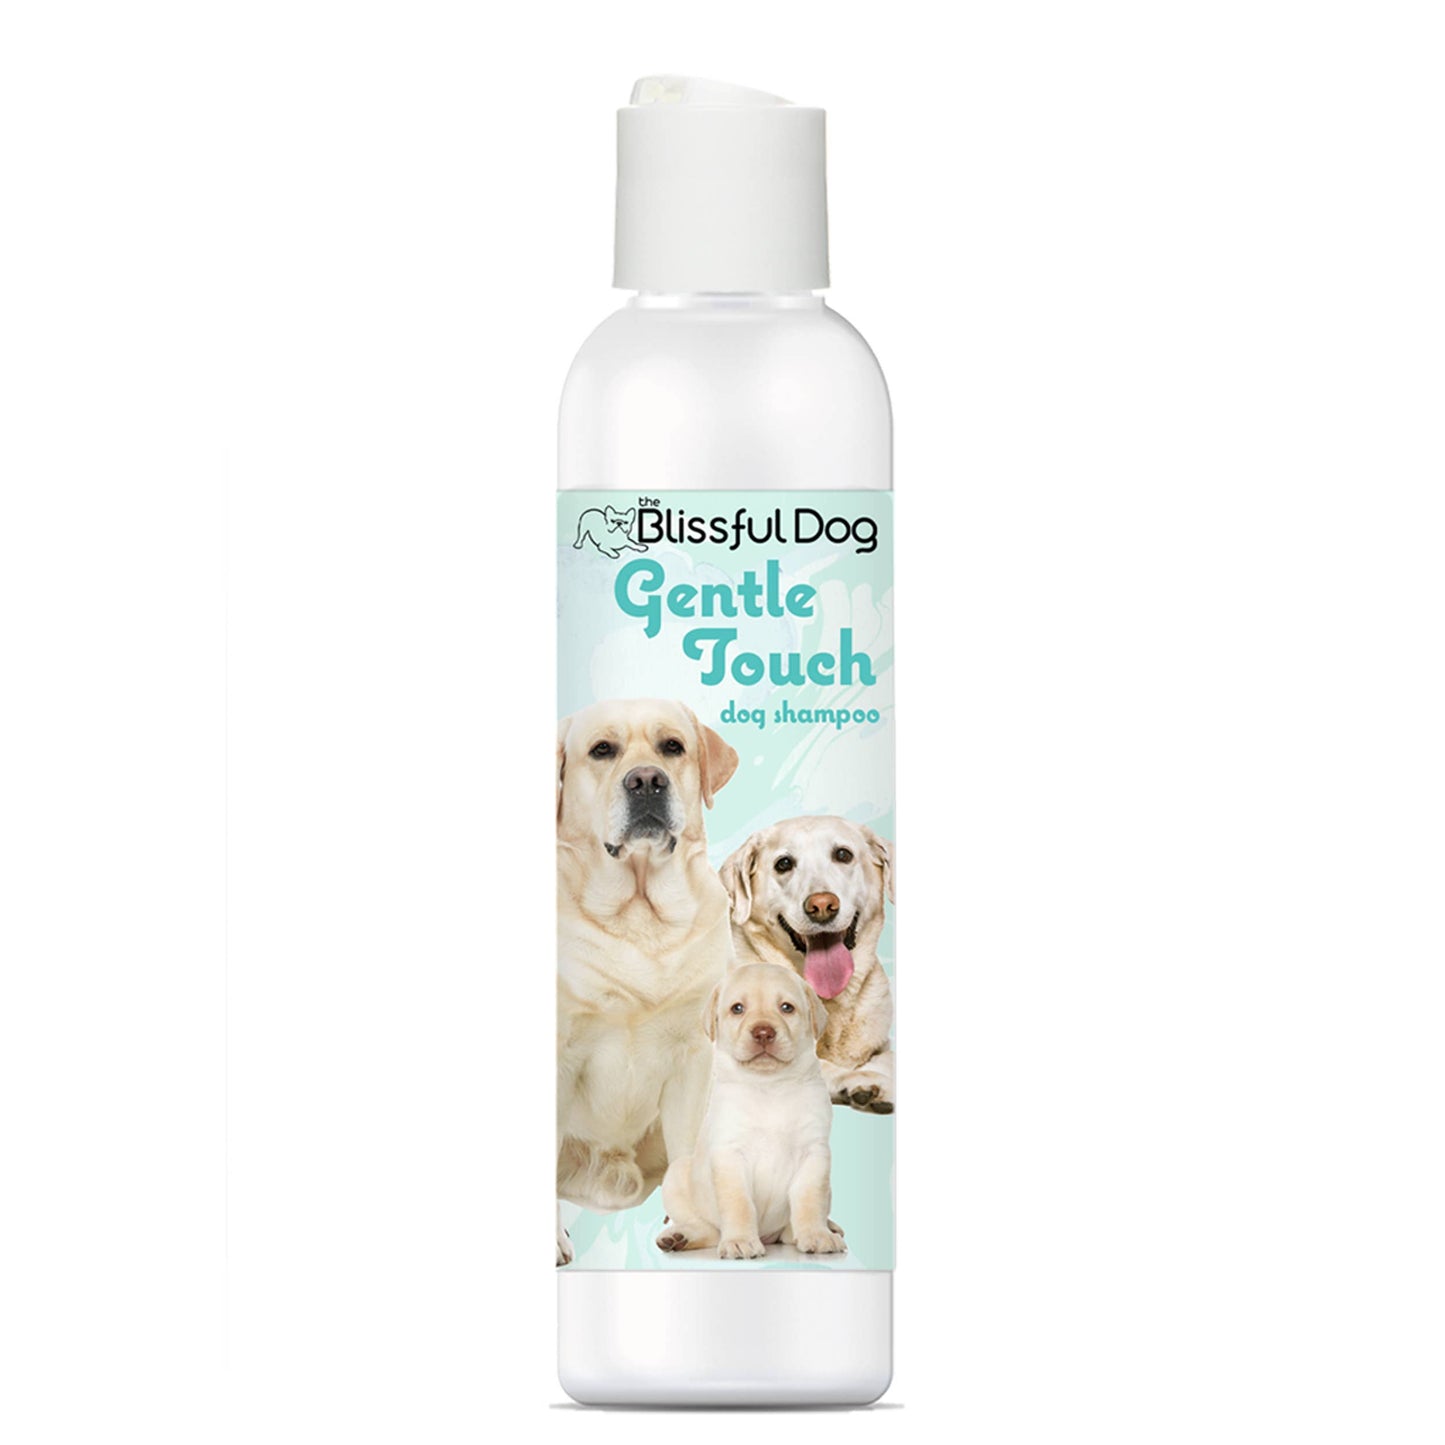 Gentle Touch Dog Shampoo for Puppies and Sensitive Dogs